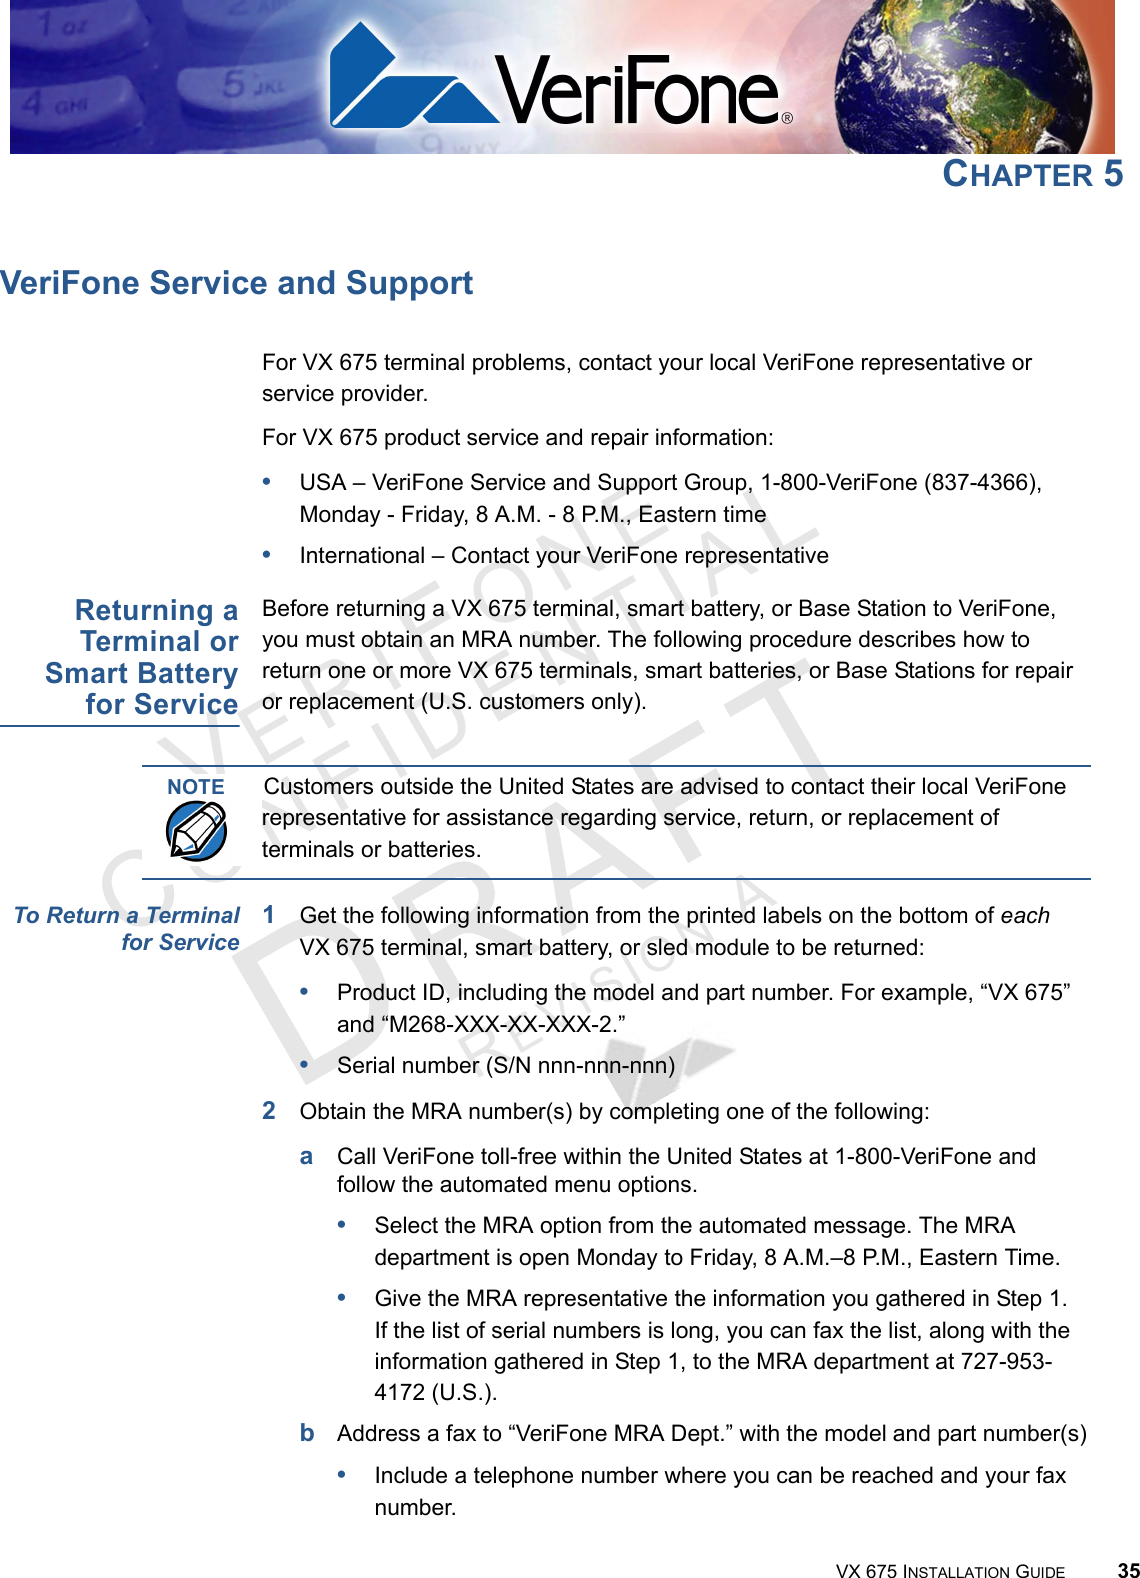 VX 675 INSTALLATION GUIDE 35VERIFONECONFIDENTIALREVISION A CHAPTER 5VeriFone Service and SupportFor VX 675 terminal problems, contact your local VeriFone representative or service provider. For VX 675 product service and repair information:•USA – VeriFone Service and Support Group, 1-800-VeriFone (837-4366), Monday - Friday, 8 A.M. - 8 P.M., Eastern time•International – Contact your VeriFone representative Returning aTerminal orSmart Batteryfor ServiceBefore returning a VX 675 terminal, smart battery, or Base Station to VeriFone, you must obtain an MRA number. The following procedure describes how to return one or more VX 675 terminals, smart batteries, or Base Stations for repair or replacement (U.S. customers only). To Return a Terminalfor Service1Get the following information from the printed labels on the bottom of each VX 675 terminal, smart battery, or sled module to be returned:•Product ID, including the model and part number. For example, “VX 675” and “M268-XXX-XX-XXX-2.”•Serial number (S/N nnn-nnn-nnn)2Obtain the MRA number(s) by completing one of the following:aCall VeriFone toll-free within the United States at 1-800-VeriFone and follow the automated menu options.•Select the MRA option from the automated message. The MRA department is open Monday to Friday, 8 A.M.–8 P.M., Eastern Time.•Give the MRA representative the information you gathered in Step 1.If the list of serial numbers is long, you can fax the list, along with the information gathered in Step 1, to the MRA department at 727-953-4172 (U.S.).bAddress a fax to “VeriFone MRA Dept.” with the model and part number(s)•Include a telephone number where you can be reached and your fax number.NOTE Customers outside the United States are advised to contact their local VeriFone representative for assistance regarding service, return, or replacement of terminals or batteries.